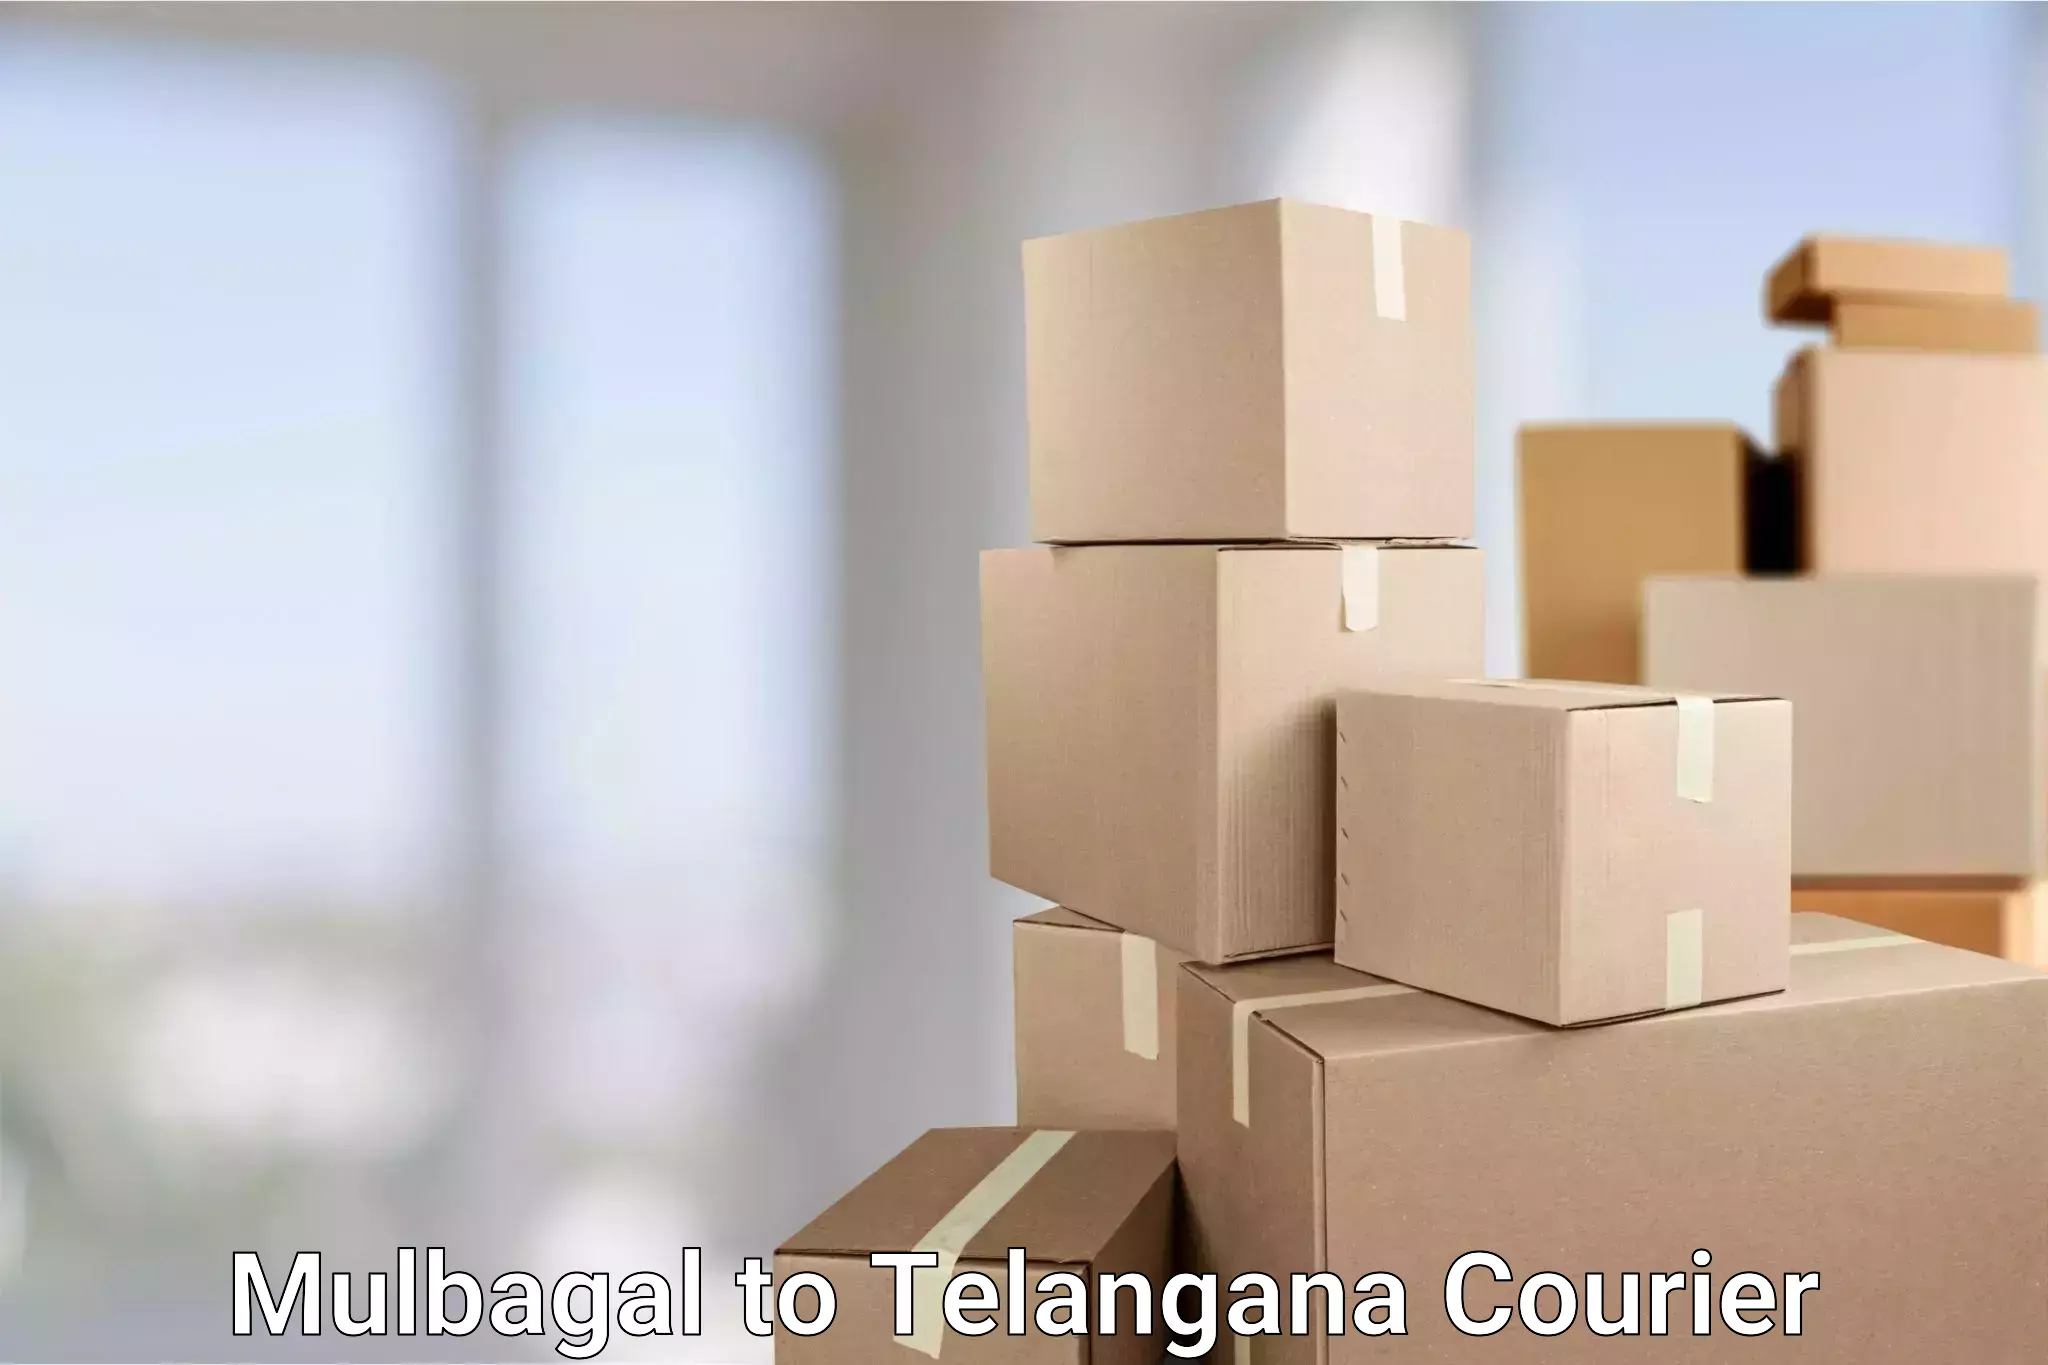 Lightweight parcel options Mulbagal to Telangana